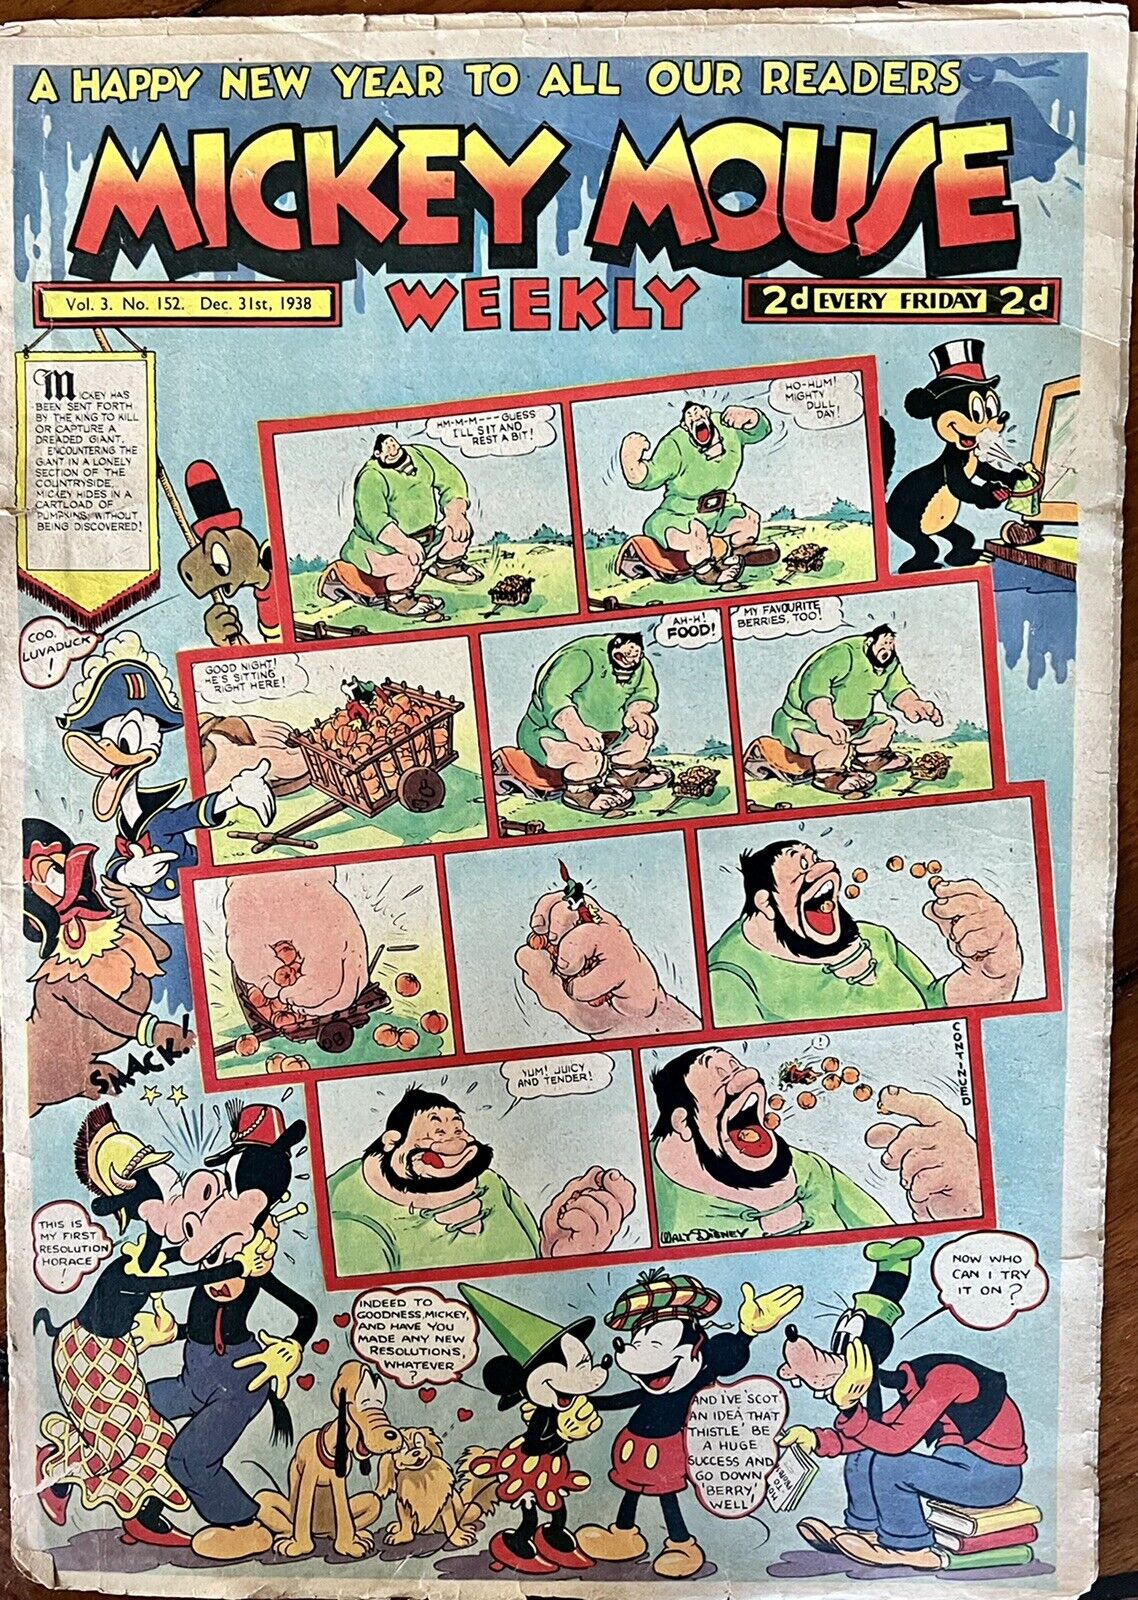 Walt Disney Mickey Mouse Weekly - Large Format Comic - December 31, 1938